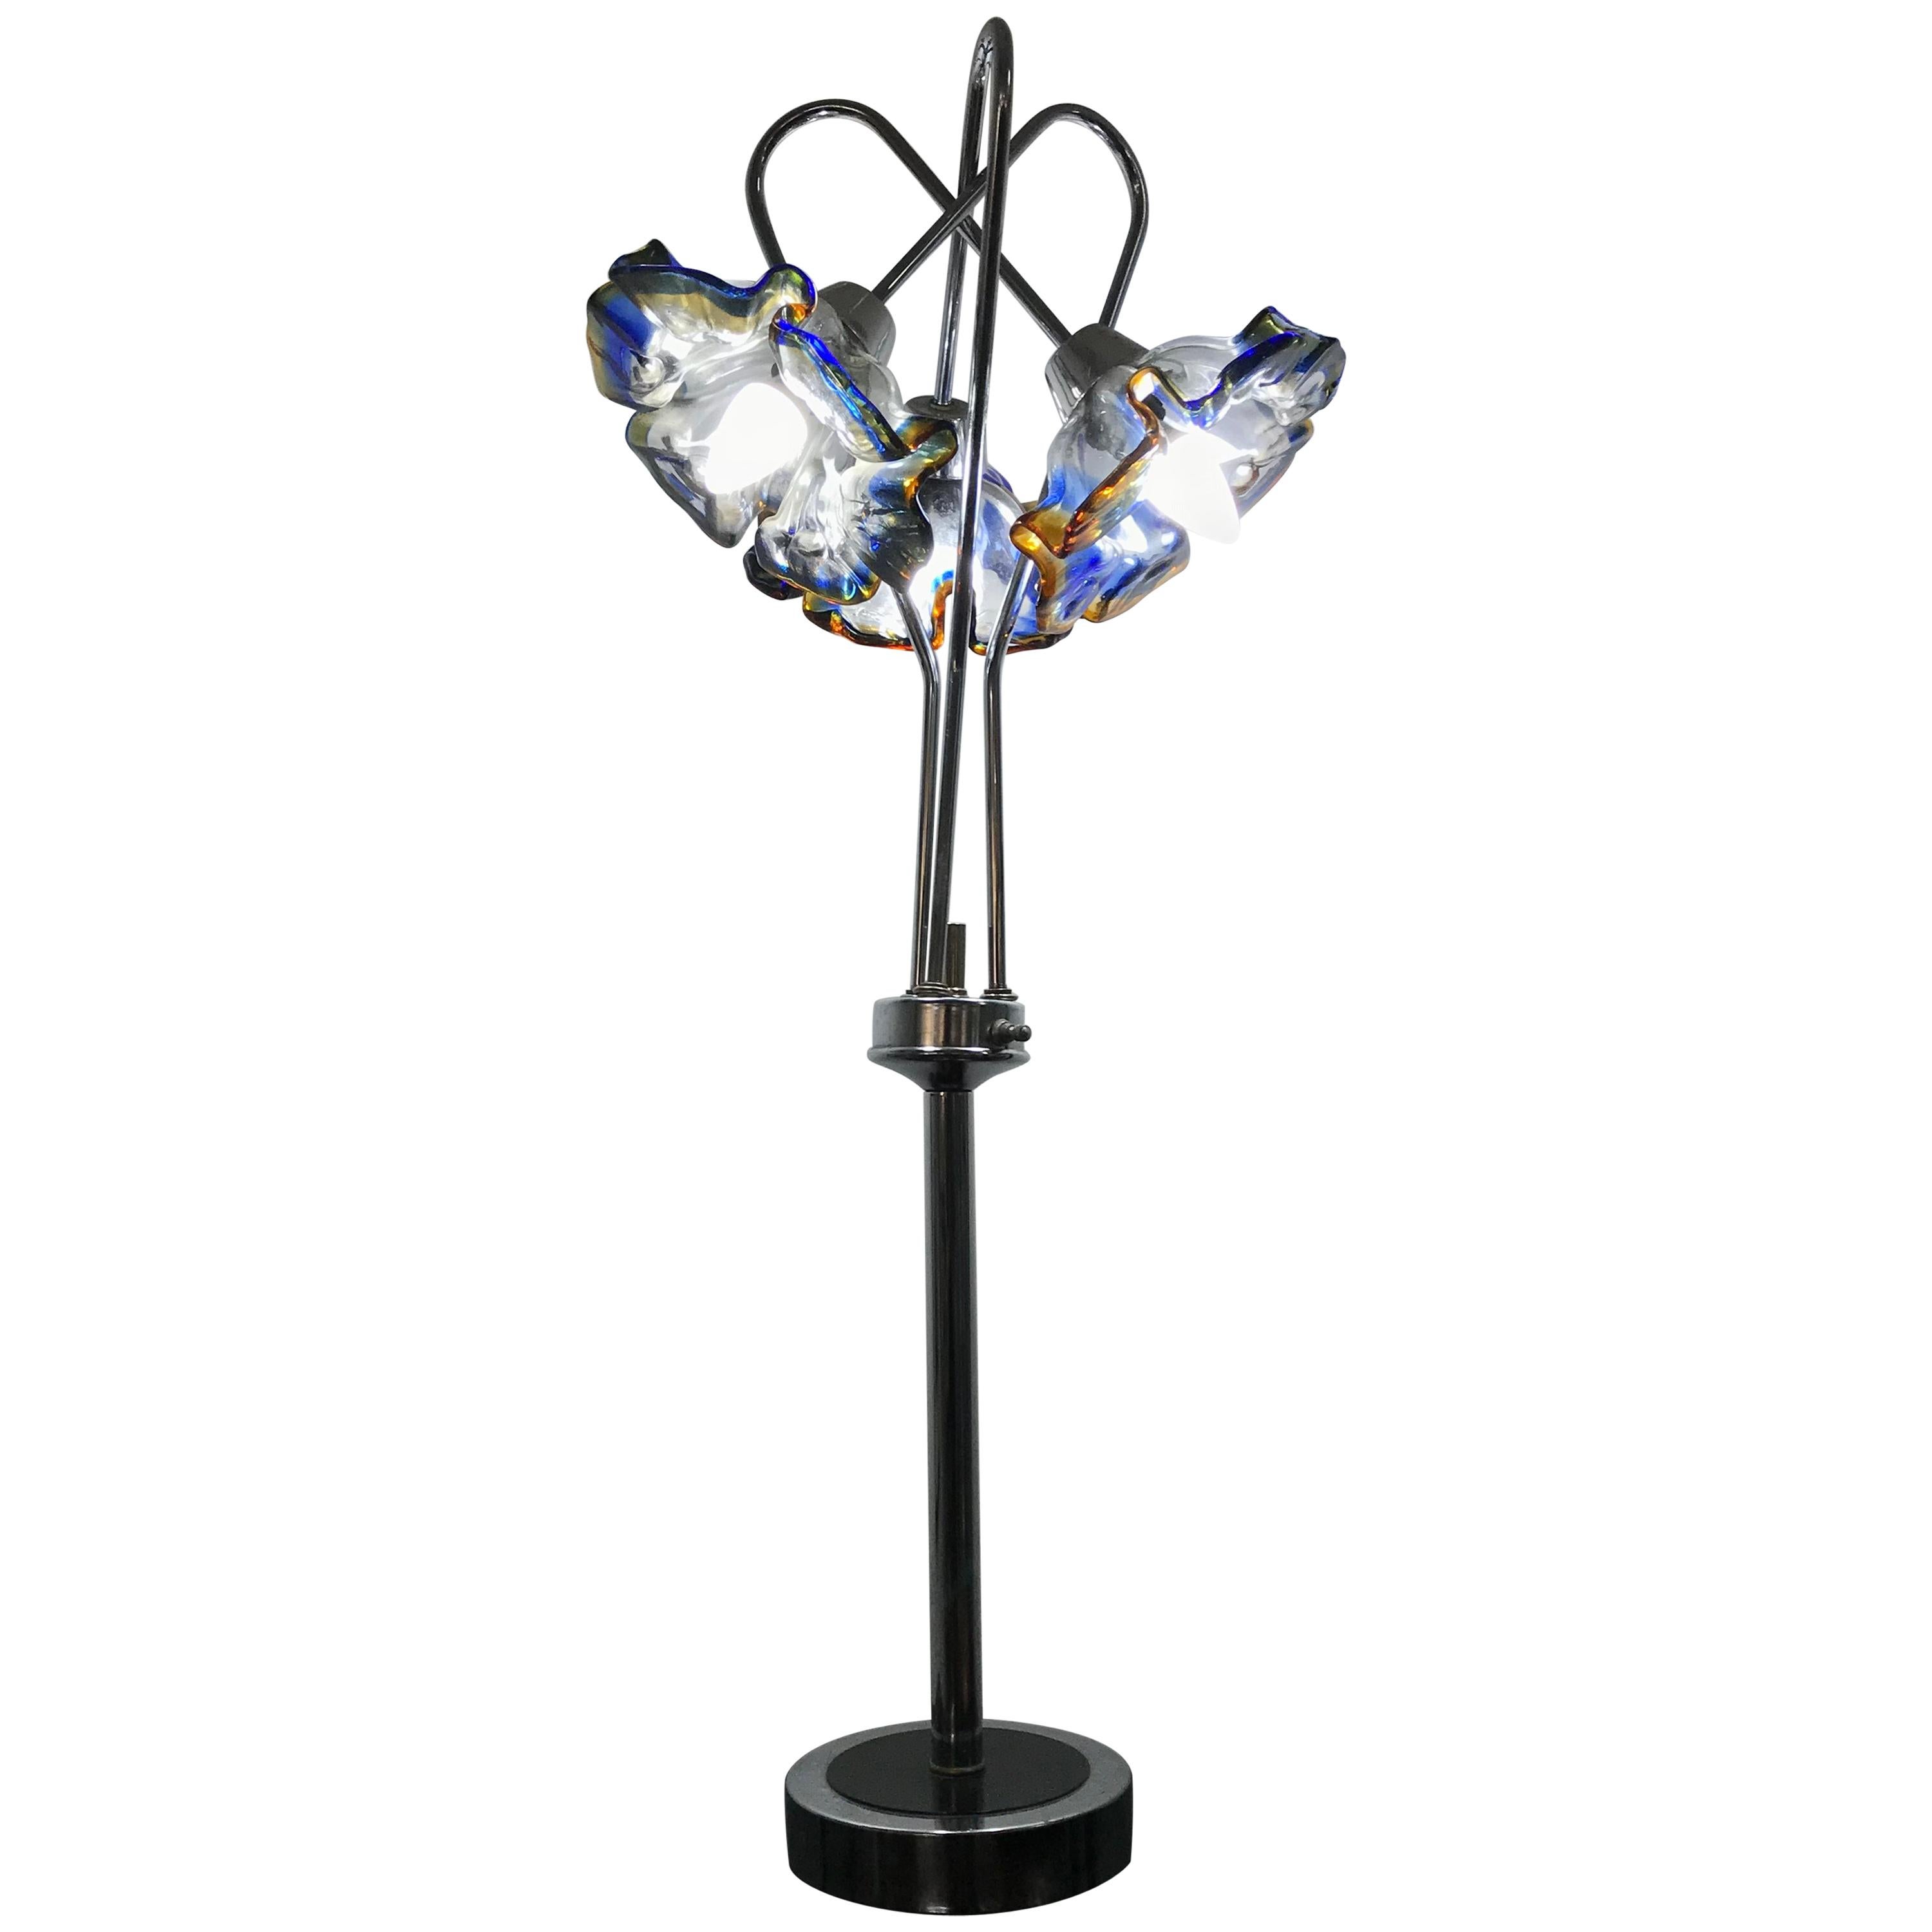 Mid-Century Modern Table Lamp by Mazzega in Murano Glass and Chrome, circa 1970 For Sale